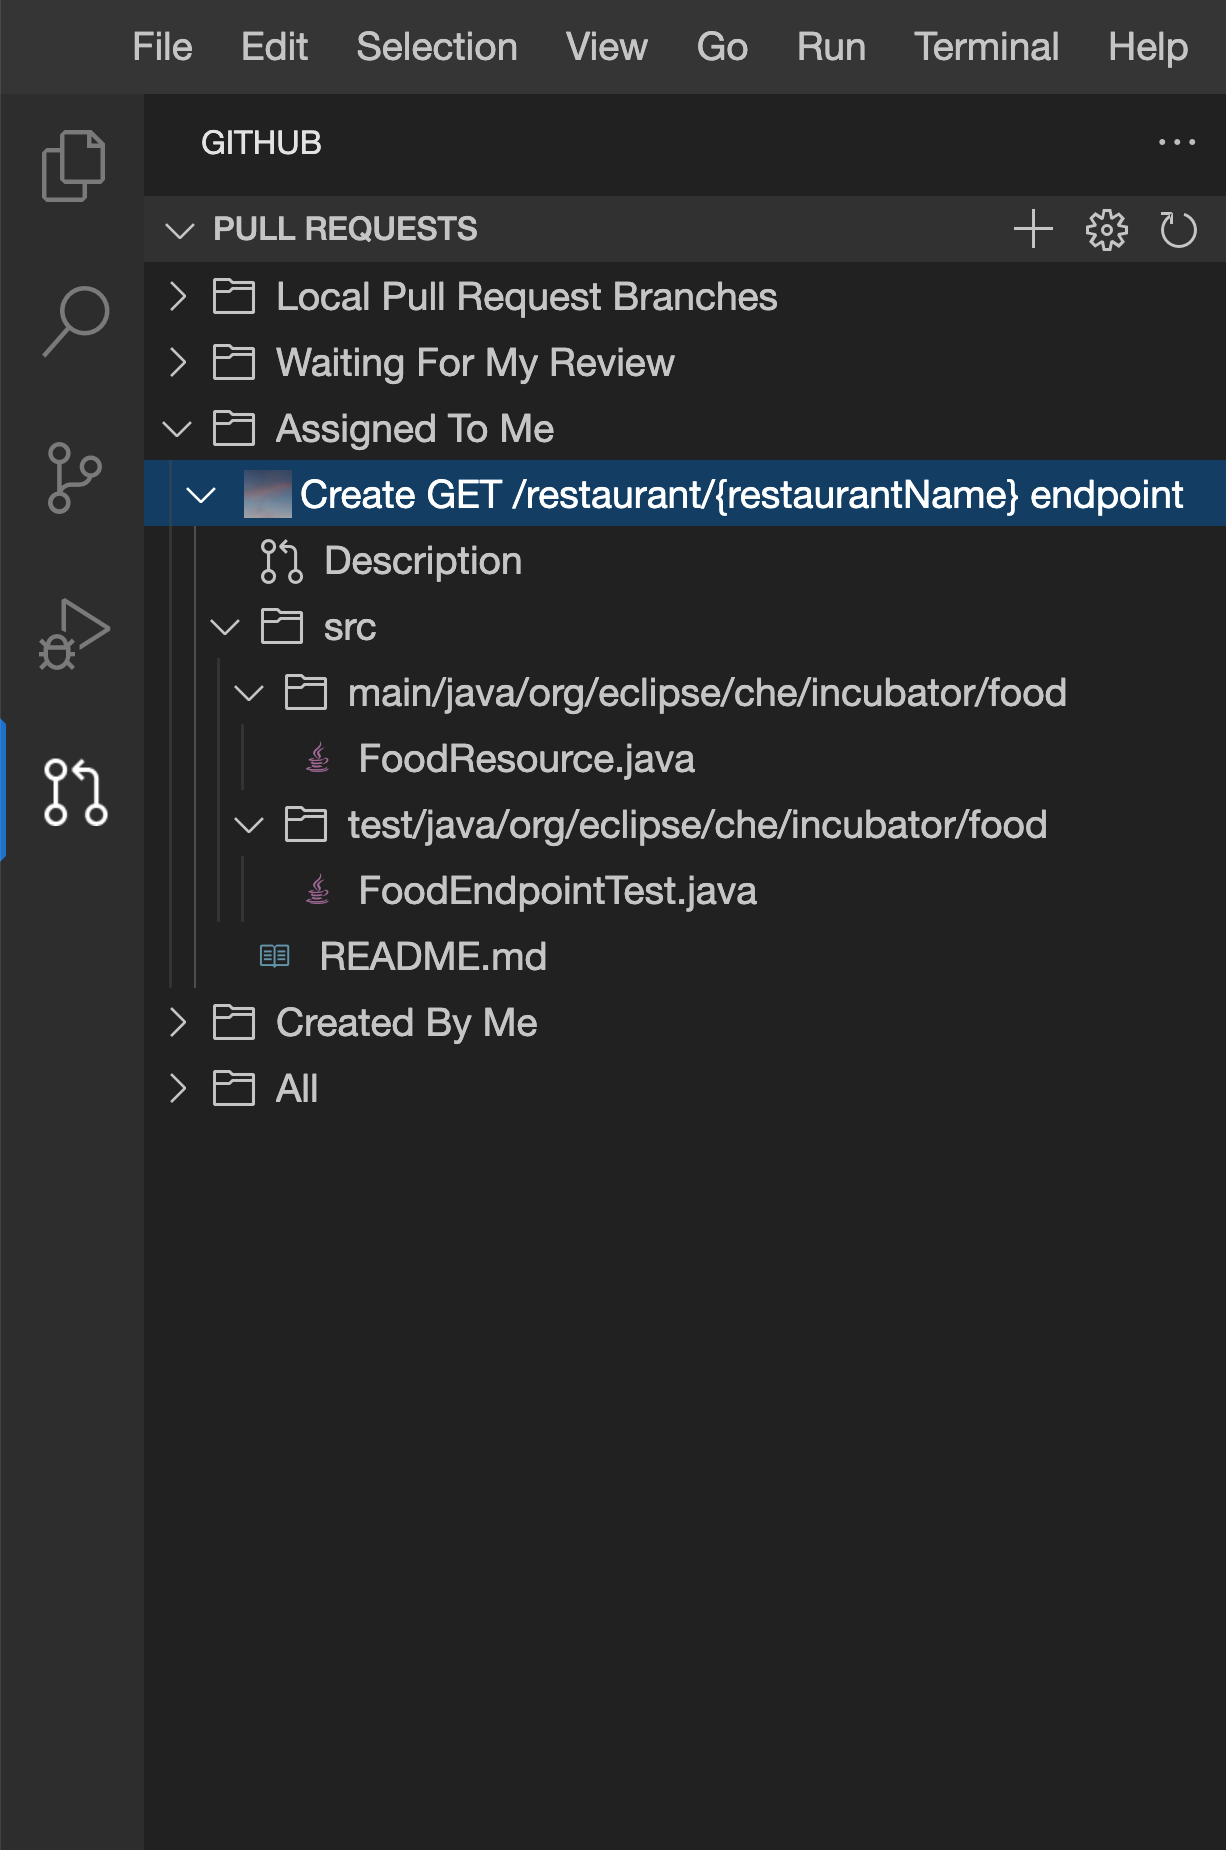 Viewing the PR within the web IDE